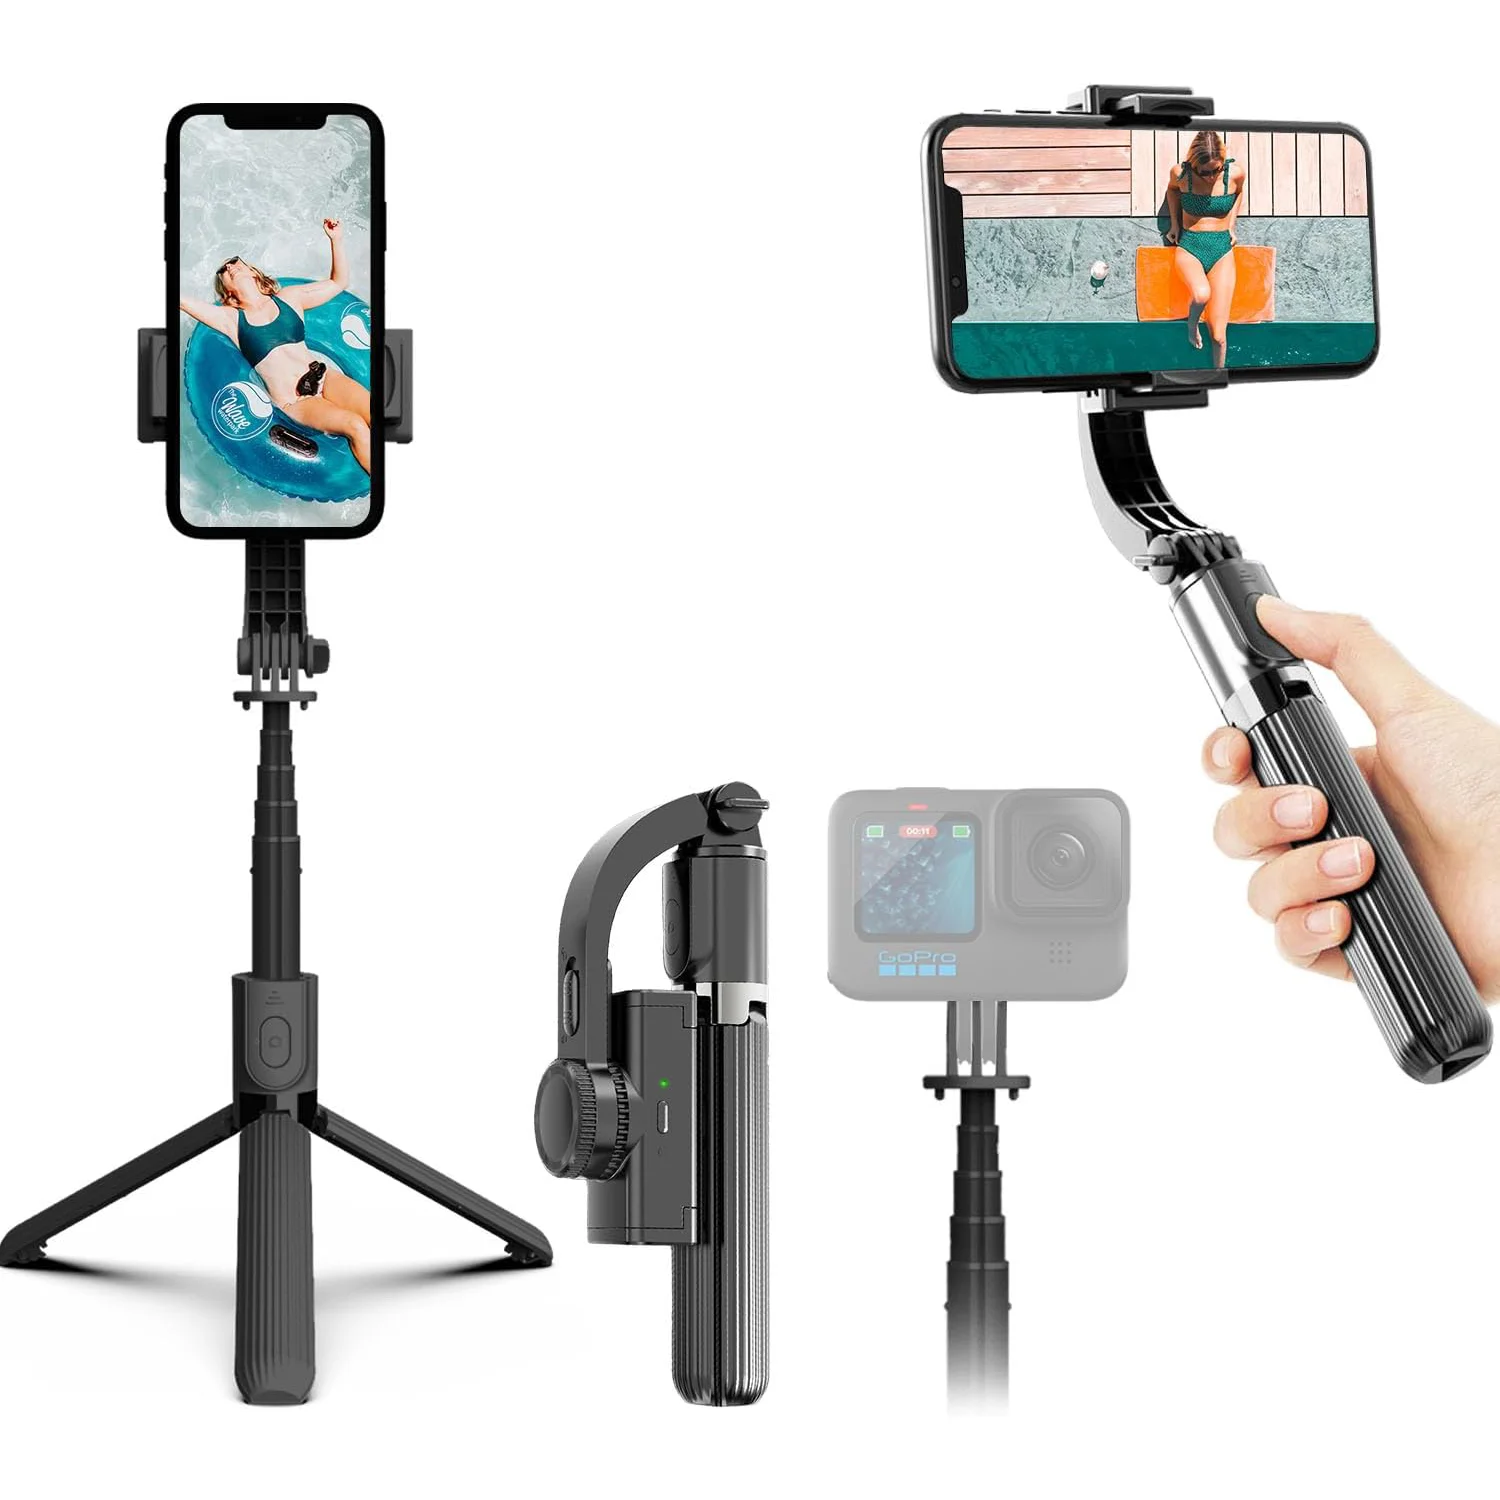 

Gimbal Stabilizer Smartphone Selfie Stick Tripod with Remote Control 360° Rotation 1-Axis Selfies Live Streaming Video Recording